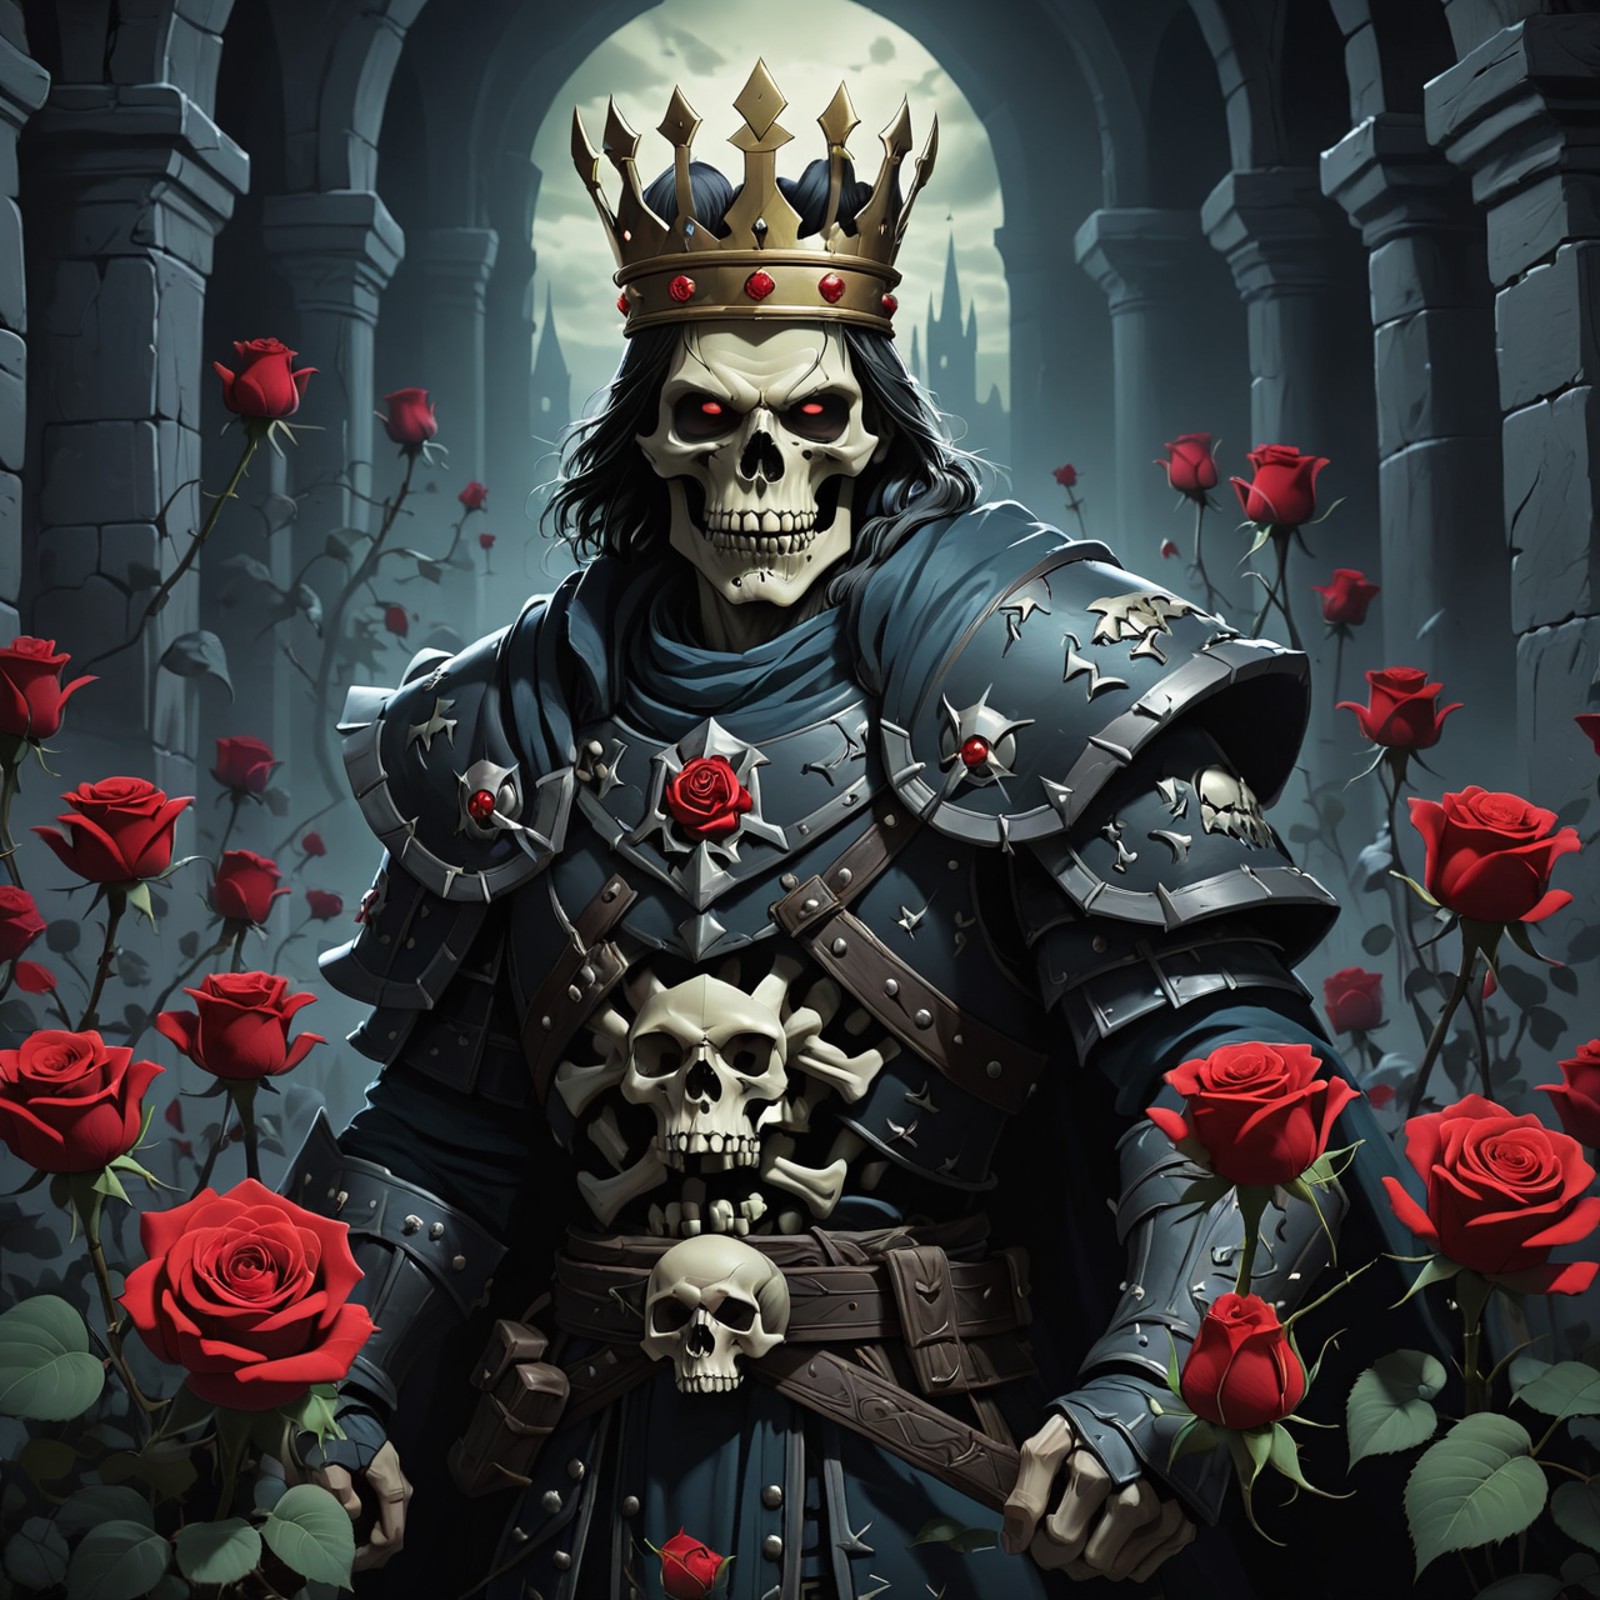 Within the walls of a citadel made of bones, a necromancer with a crown of skulls commands legions of the undead. Yet, ami...